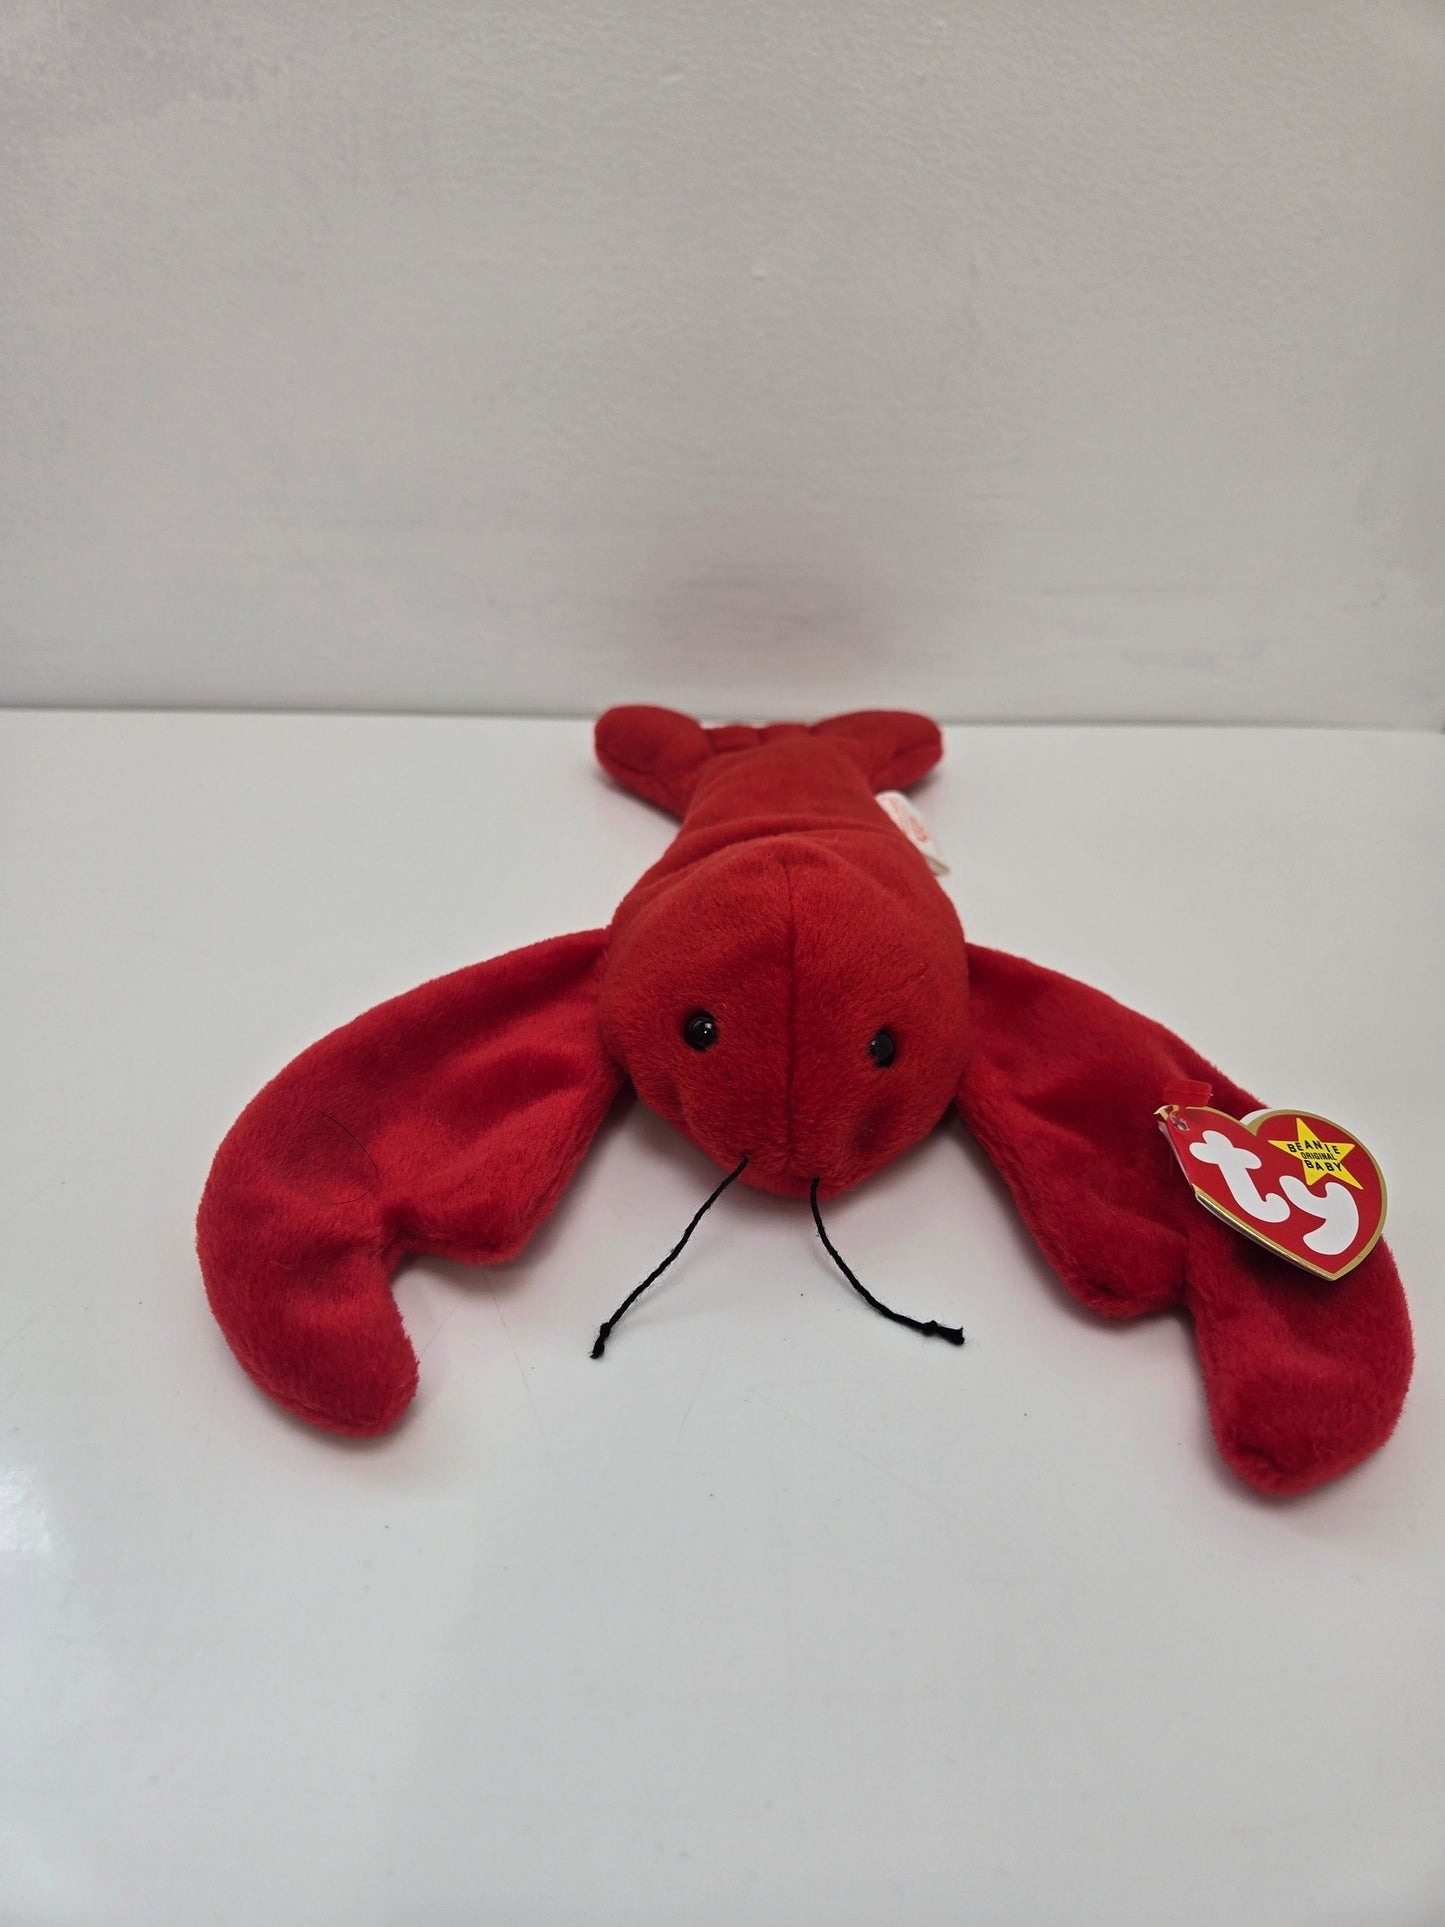 Ty Beanie Baby “Pinchers” the Lobster (8.5 inch)